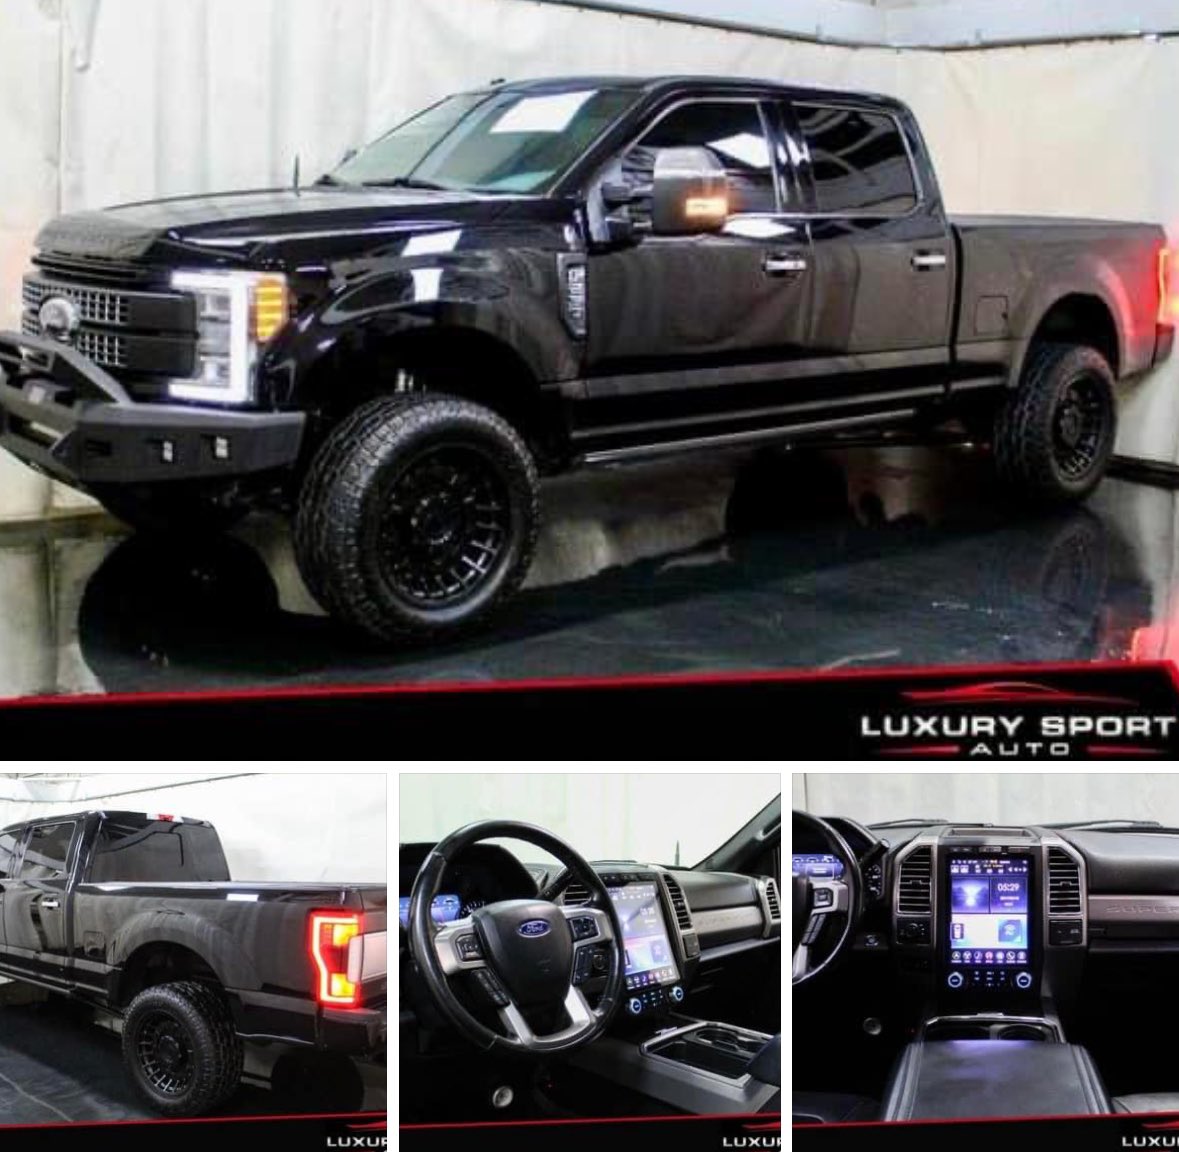 ***NEW INVENTORY***

Adventure calls with the '17 Ford F-250SD Platinum! 🏔️#FordF250 #PlatinumPackage #OffRoadKing #Turbocharged #FoxShocks #LEDLights #LuxuryOffRoad #MassagingSeats #HeavyDutyTowing #PowerStrokeDiesel #AdventureReady